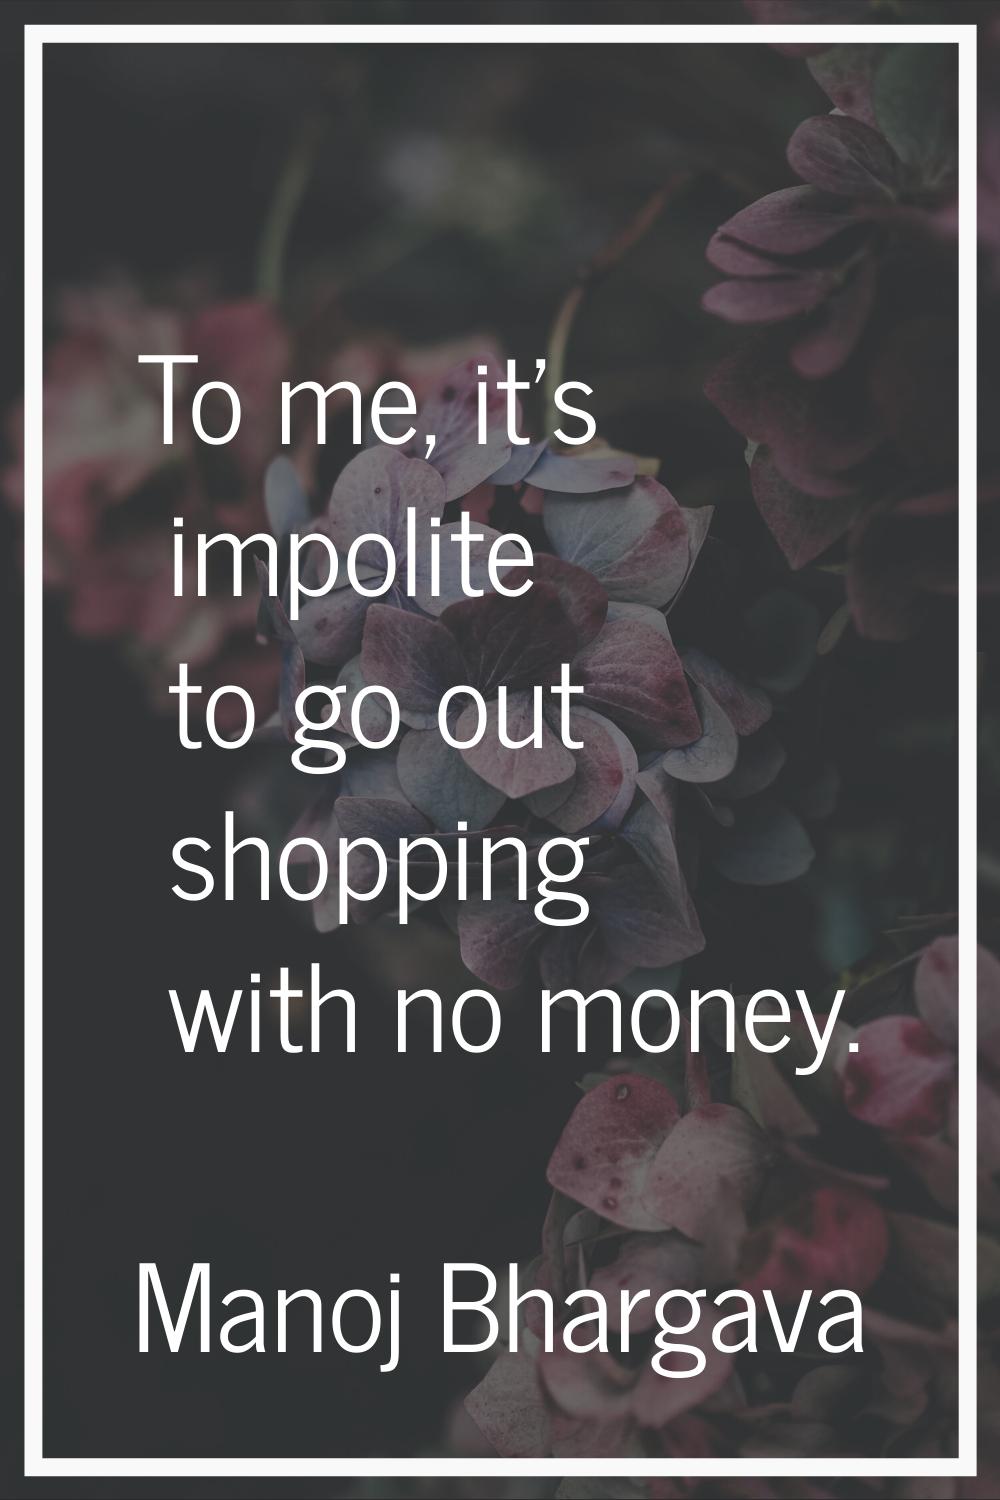 To me, it's impolite to go out shopping with no money.